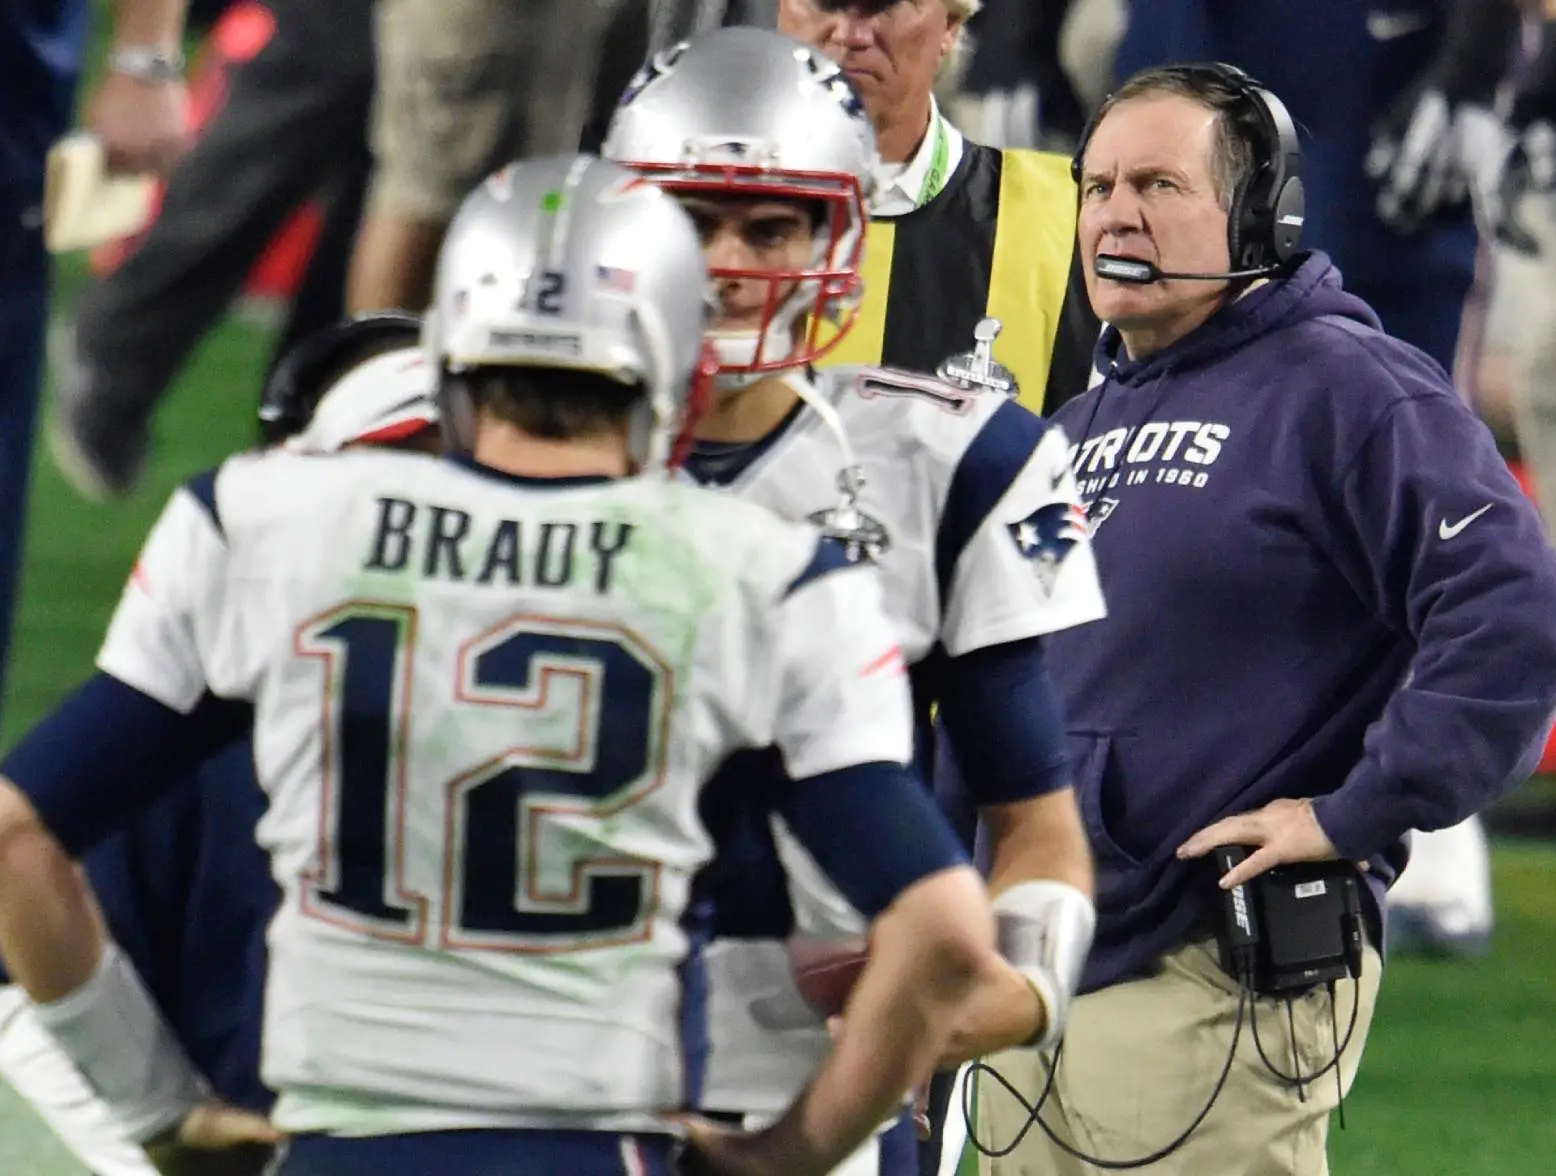 Feb 1, 2015; Glendale, AZ, USA; New England Patriots head coach Bill Belichick looks on while quarterback Tom Brady (12) and quarterback Jimmy Garoppolo (10) speak in the foreground during the fourth quarter against the Seattle Seahawks in Super Bowl XLIX at University of Phoenix Stadium. Credit: Joe Camporeale-USA TODAY Sports